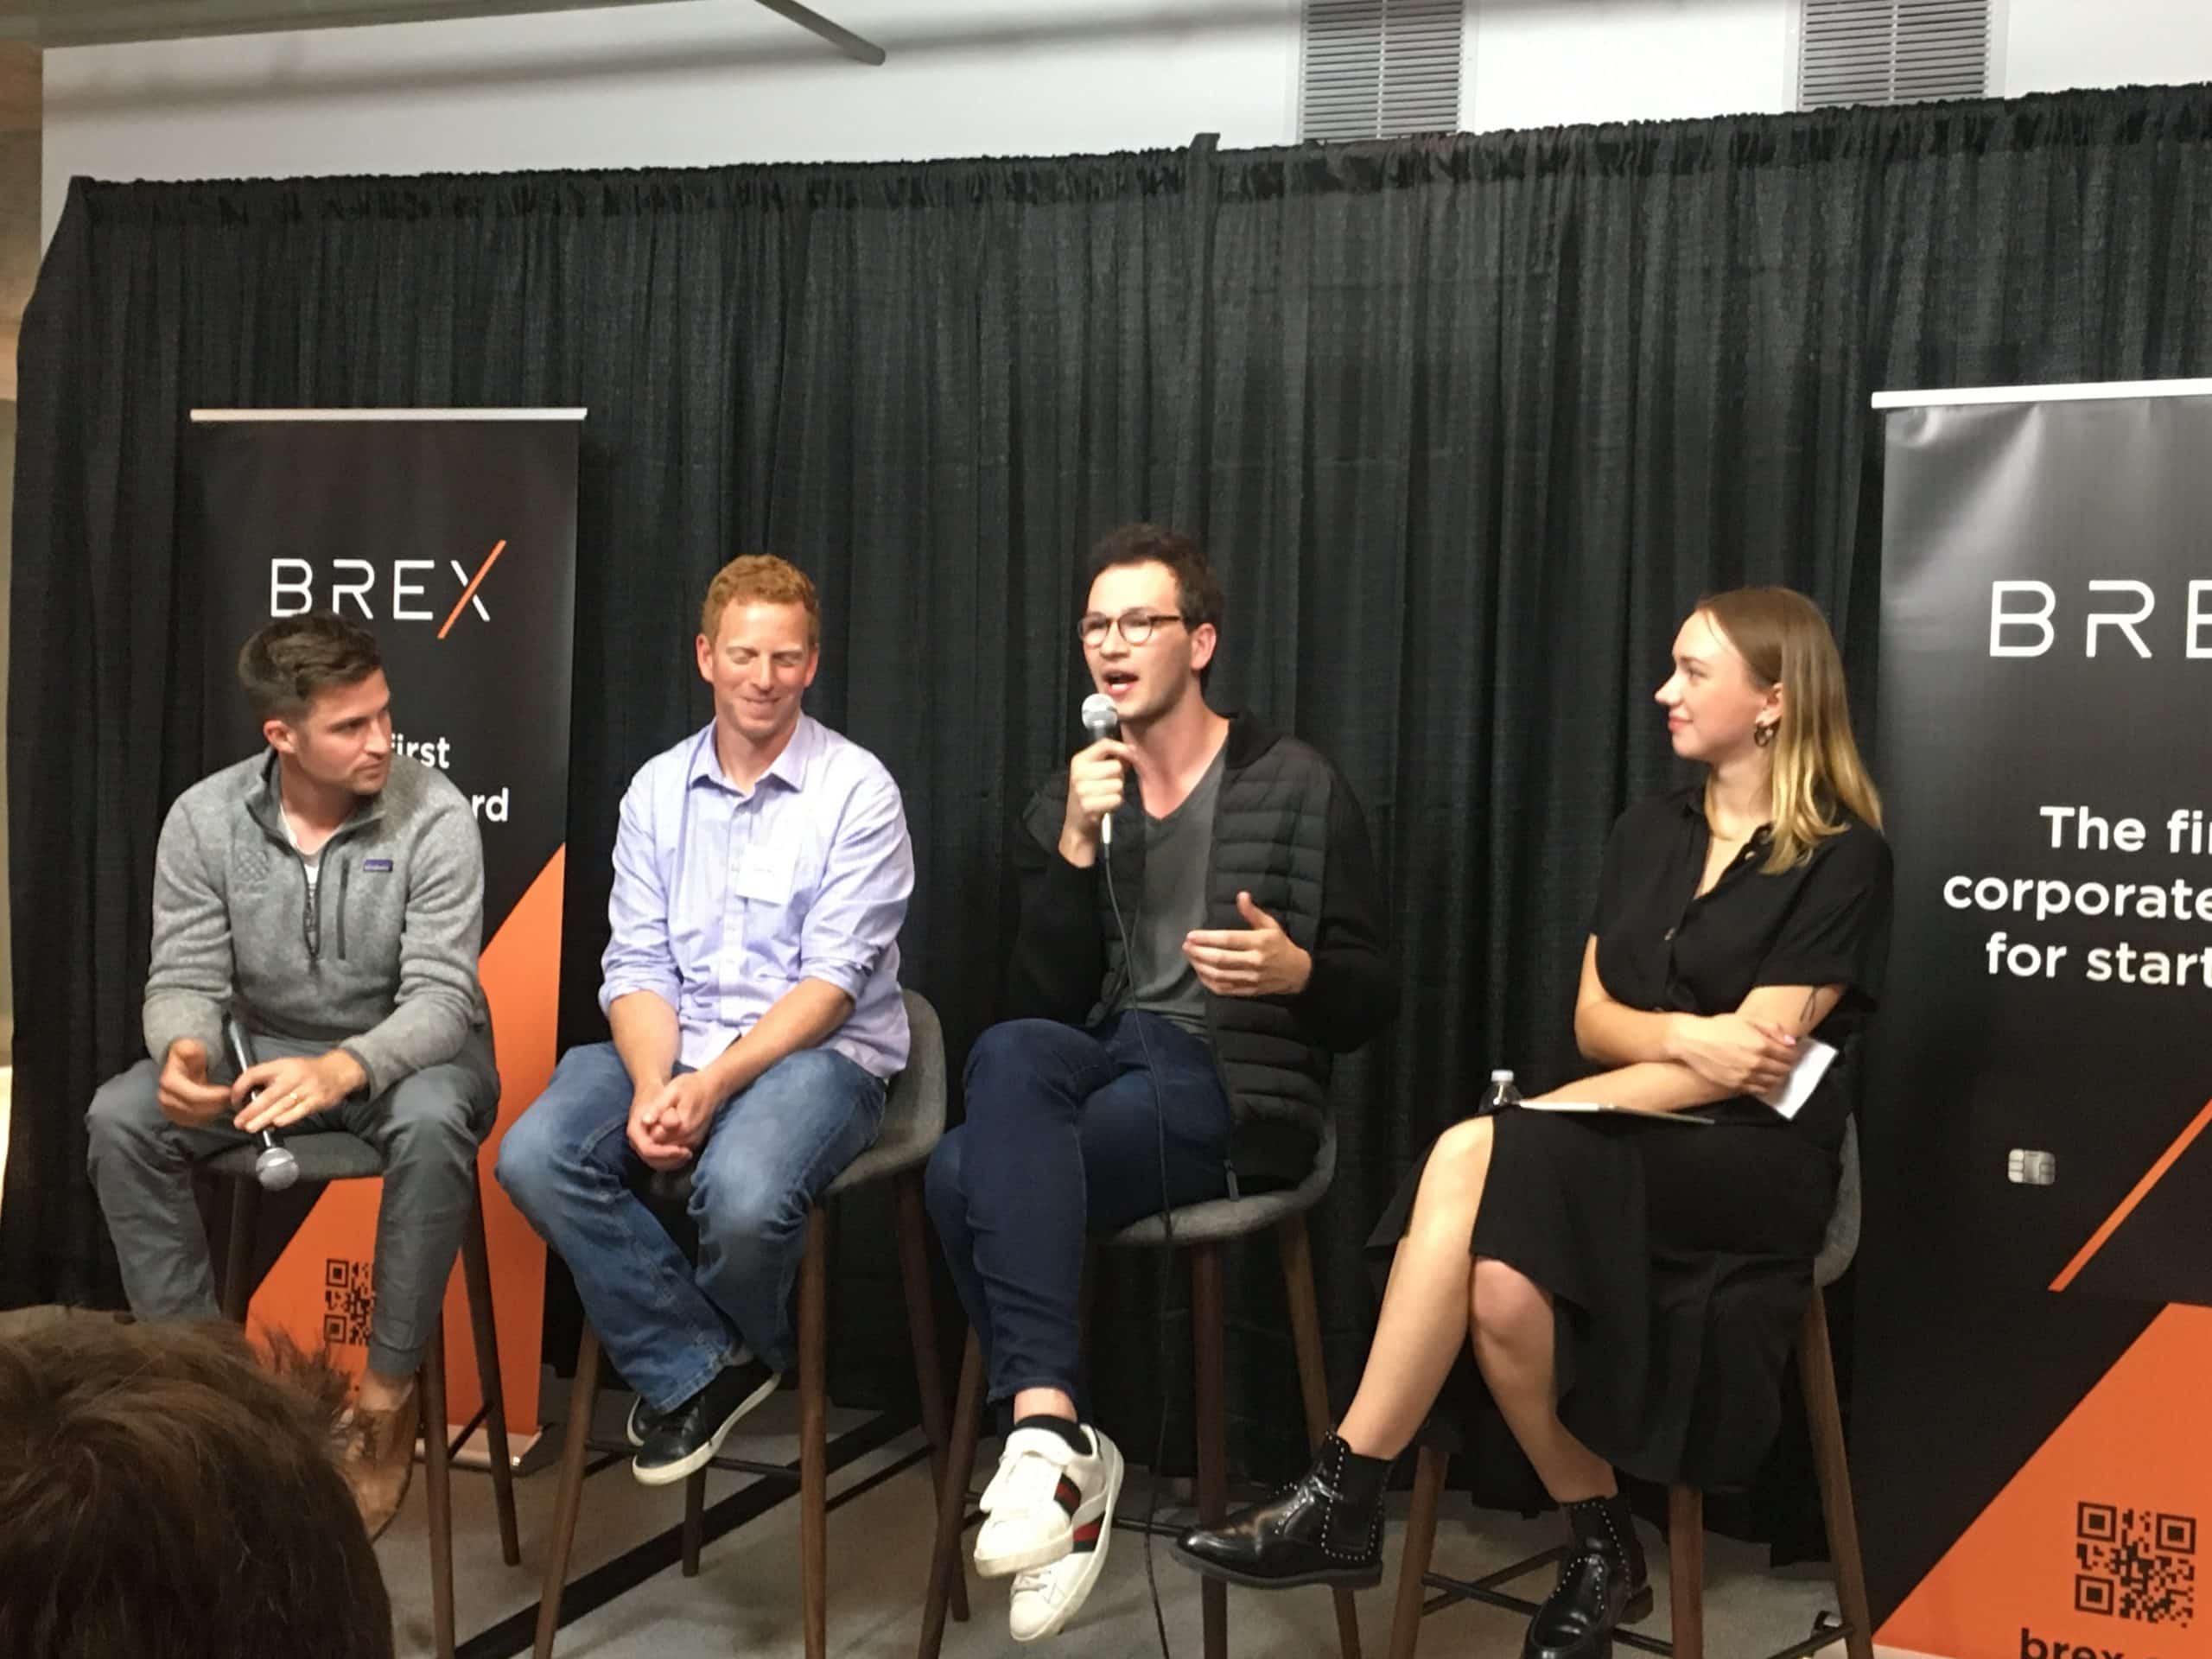 Brex Talks: How to build your second product - My takeaways